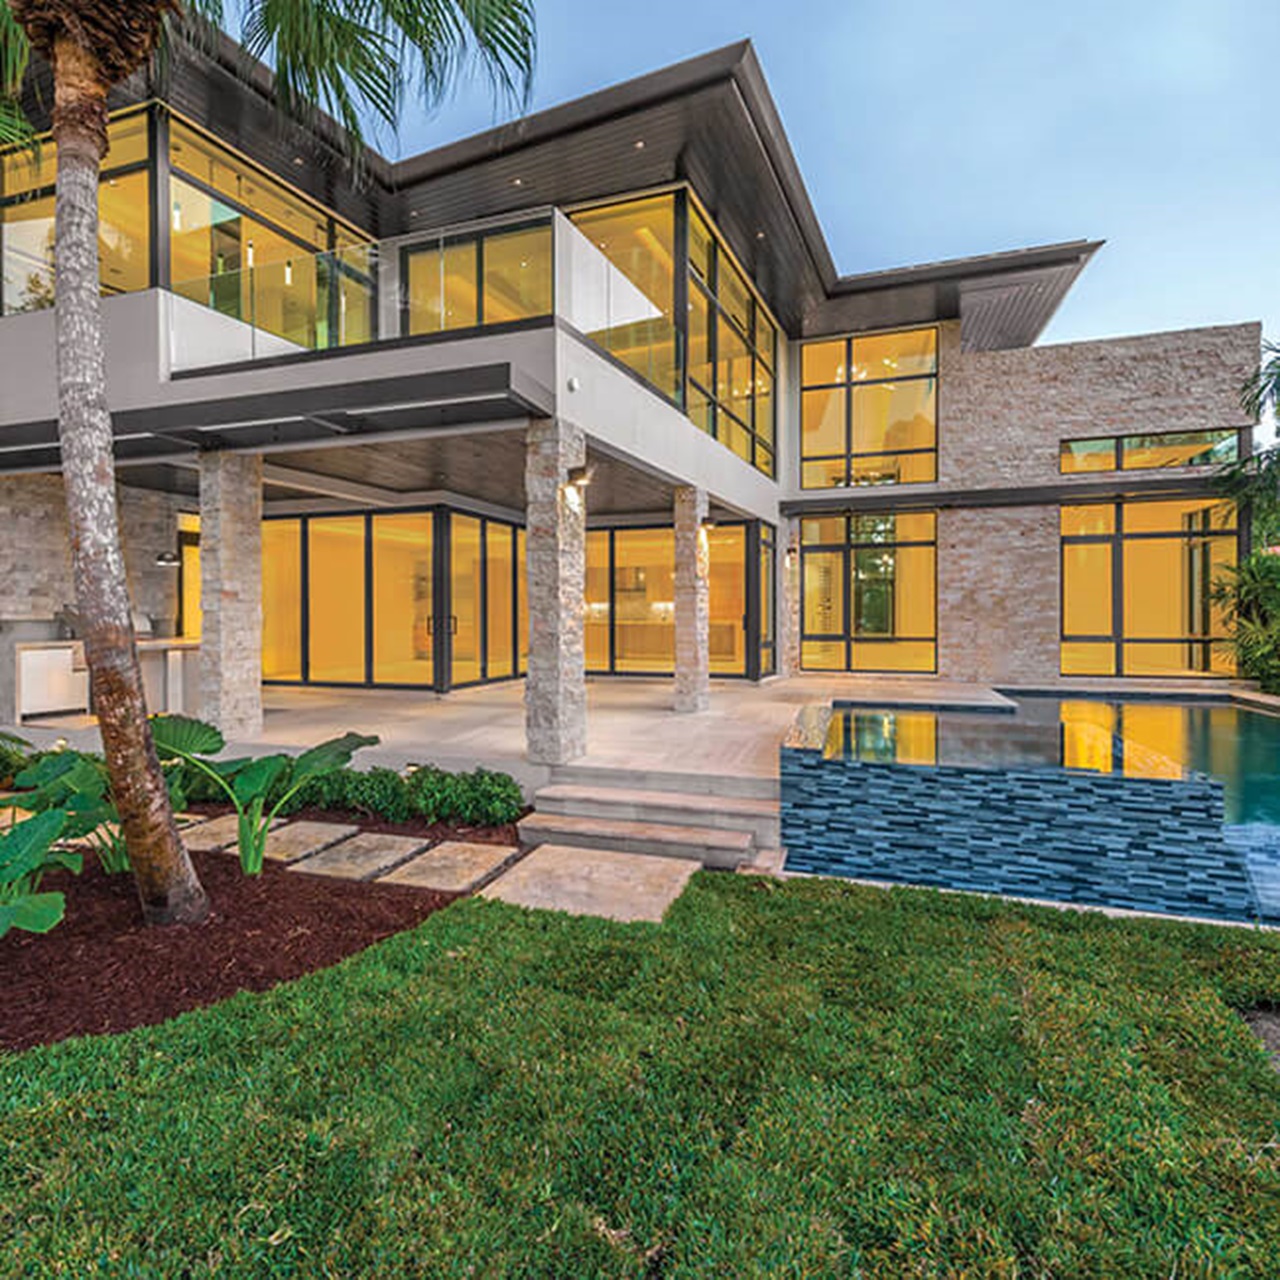 Exterior of home with Marvin Signature Coastline Casement Awning Picture Narrow Frame Windows and Multi-Slide Door